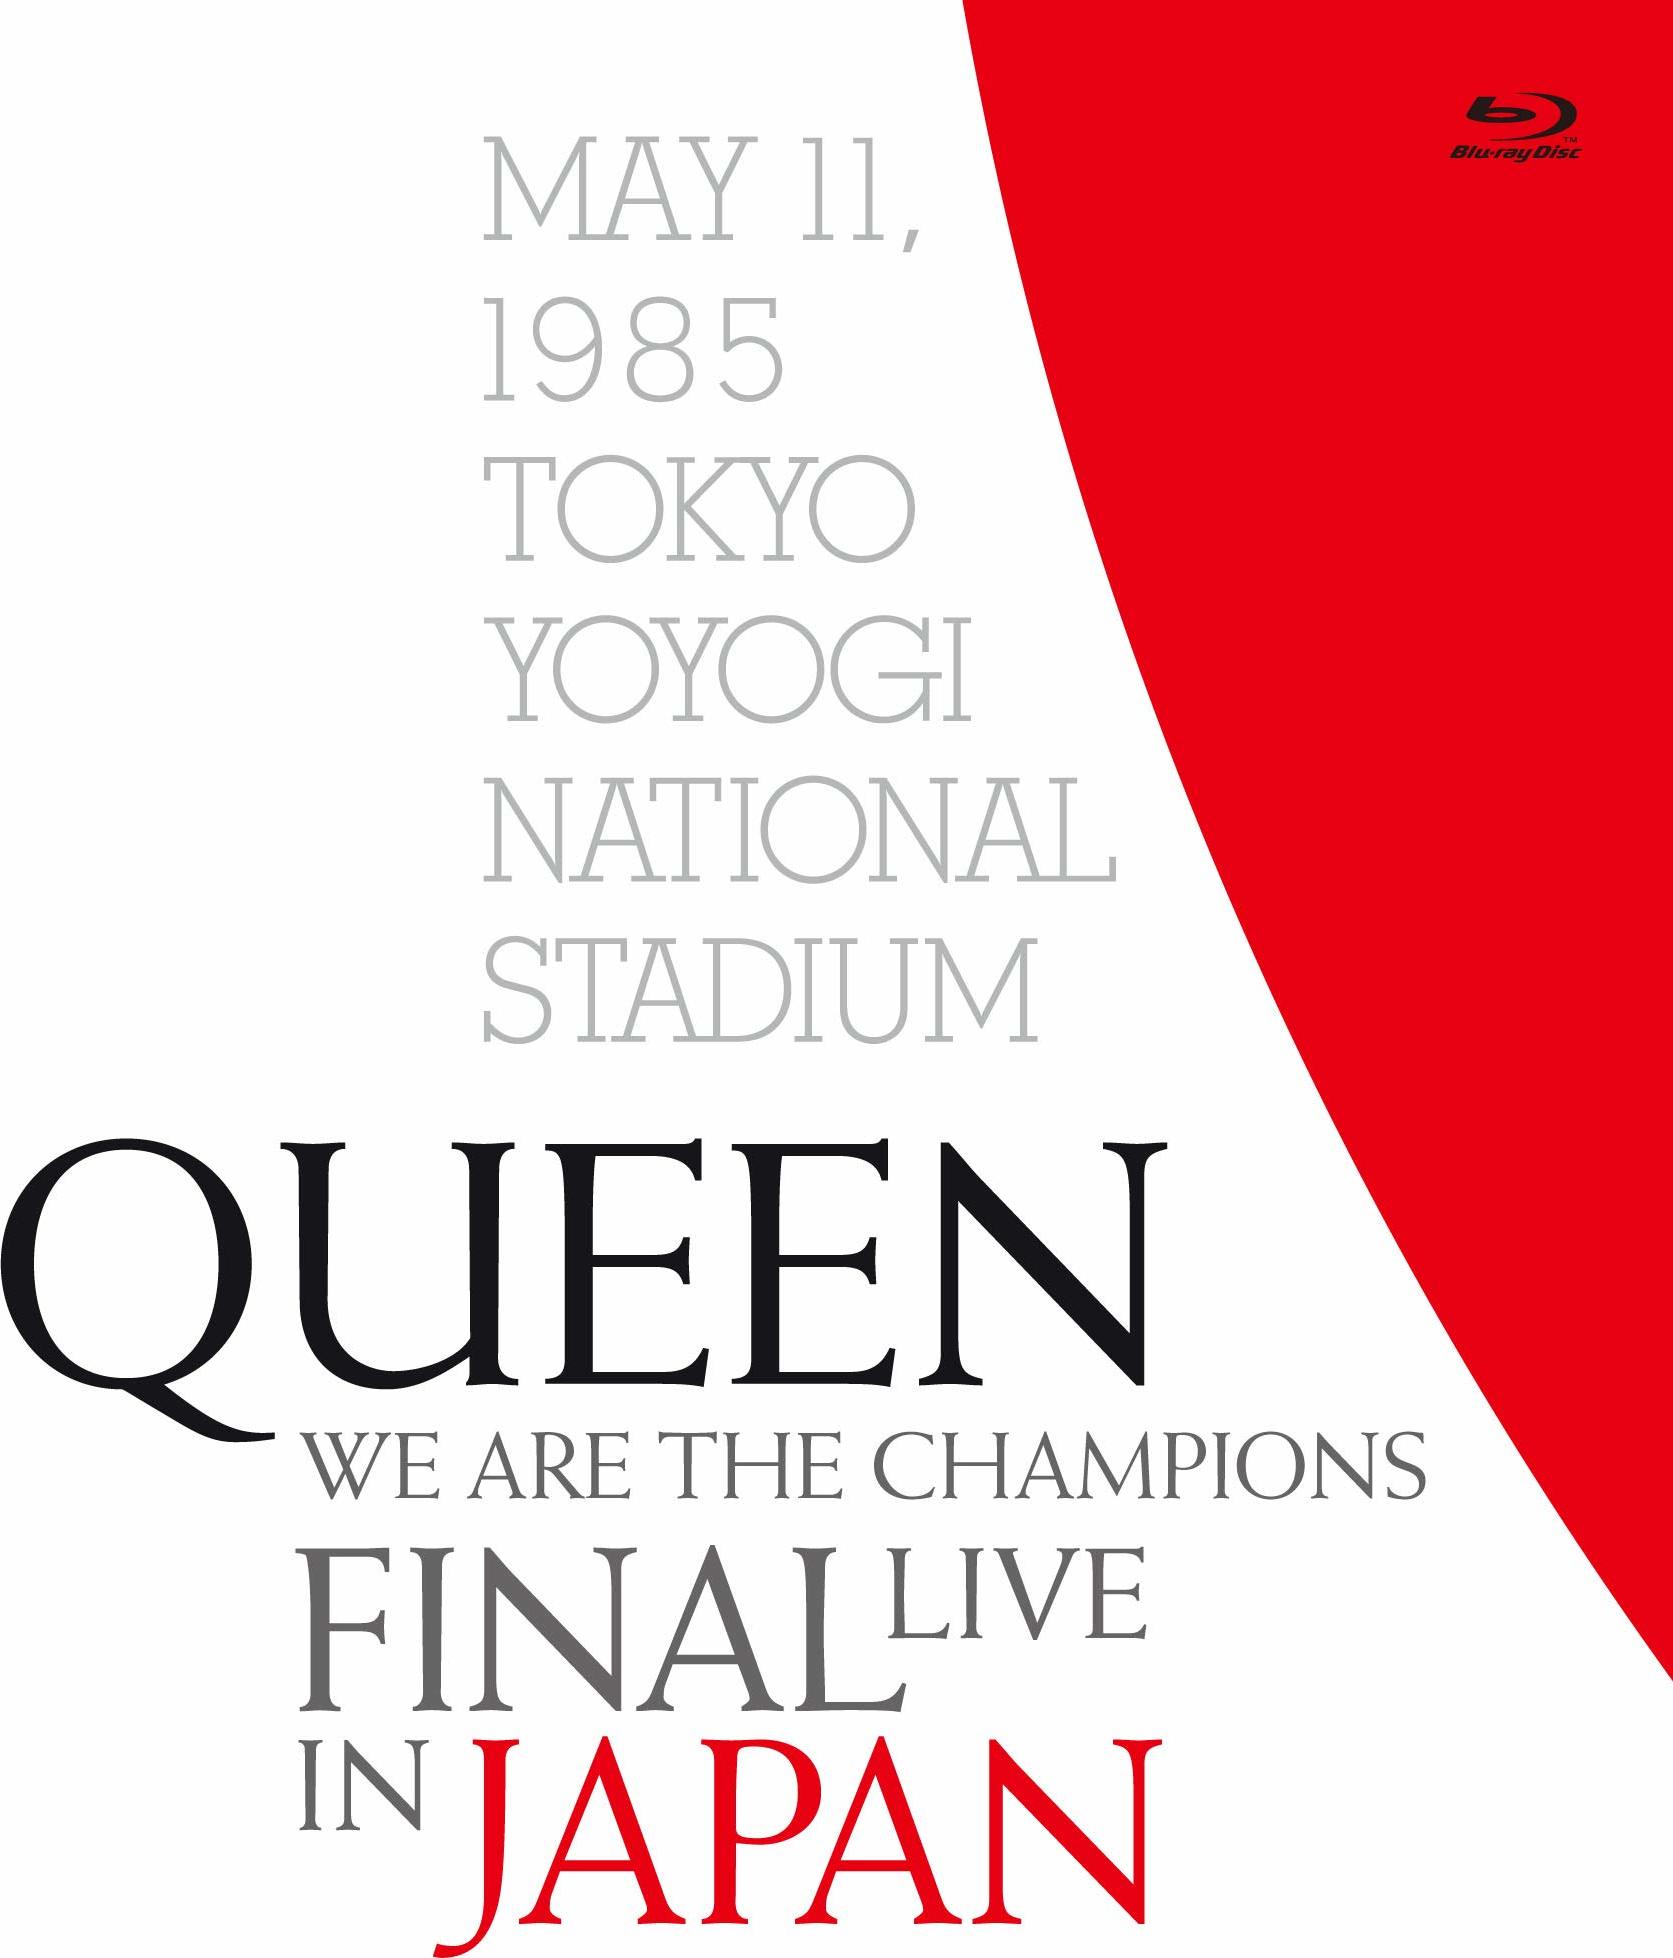 Queen – We Are The Champions: Final Live In Japan (2019) Blu-ray 1080i LPCM 2.0